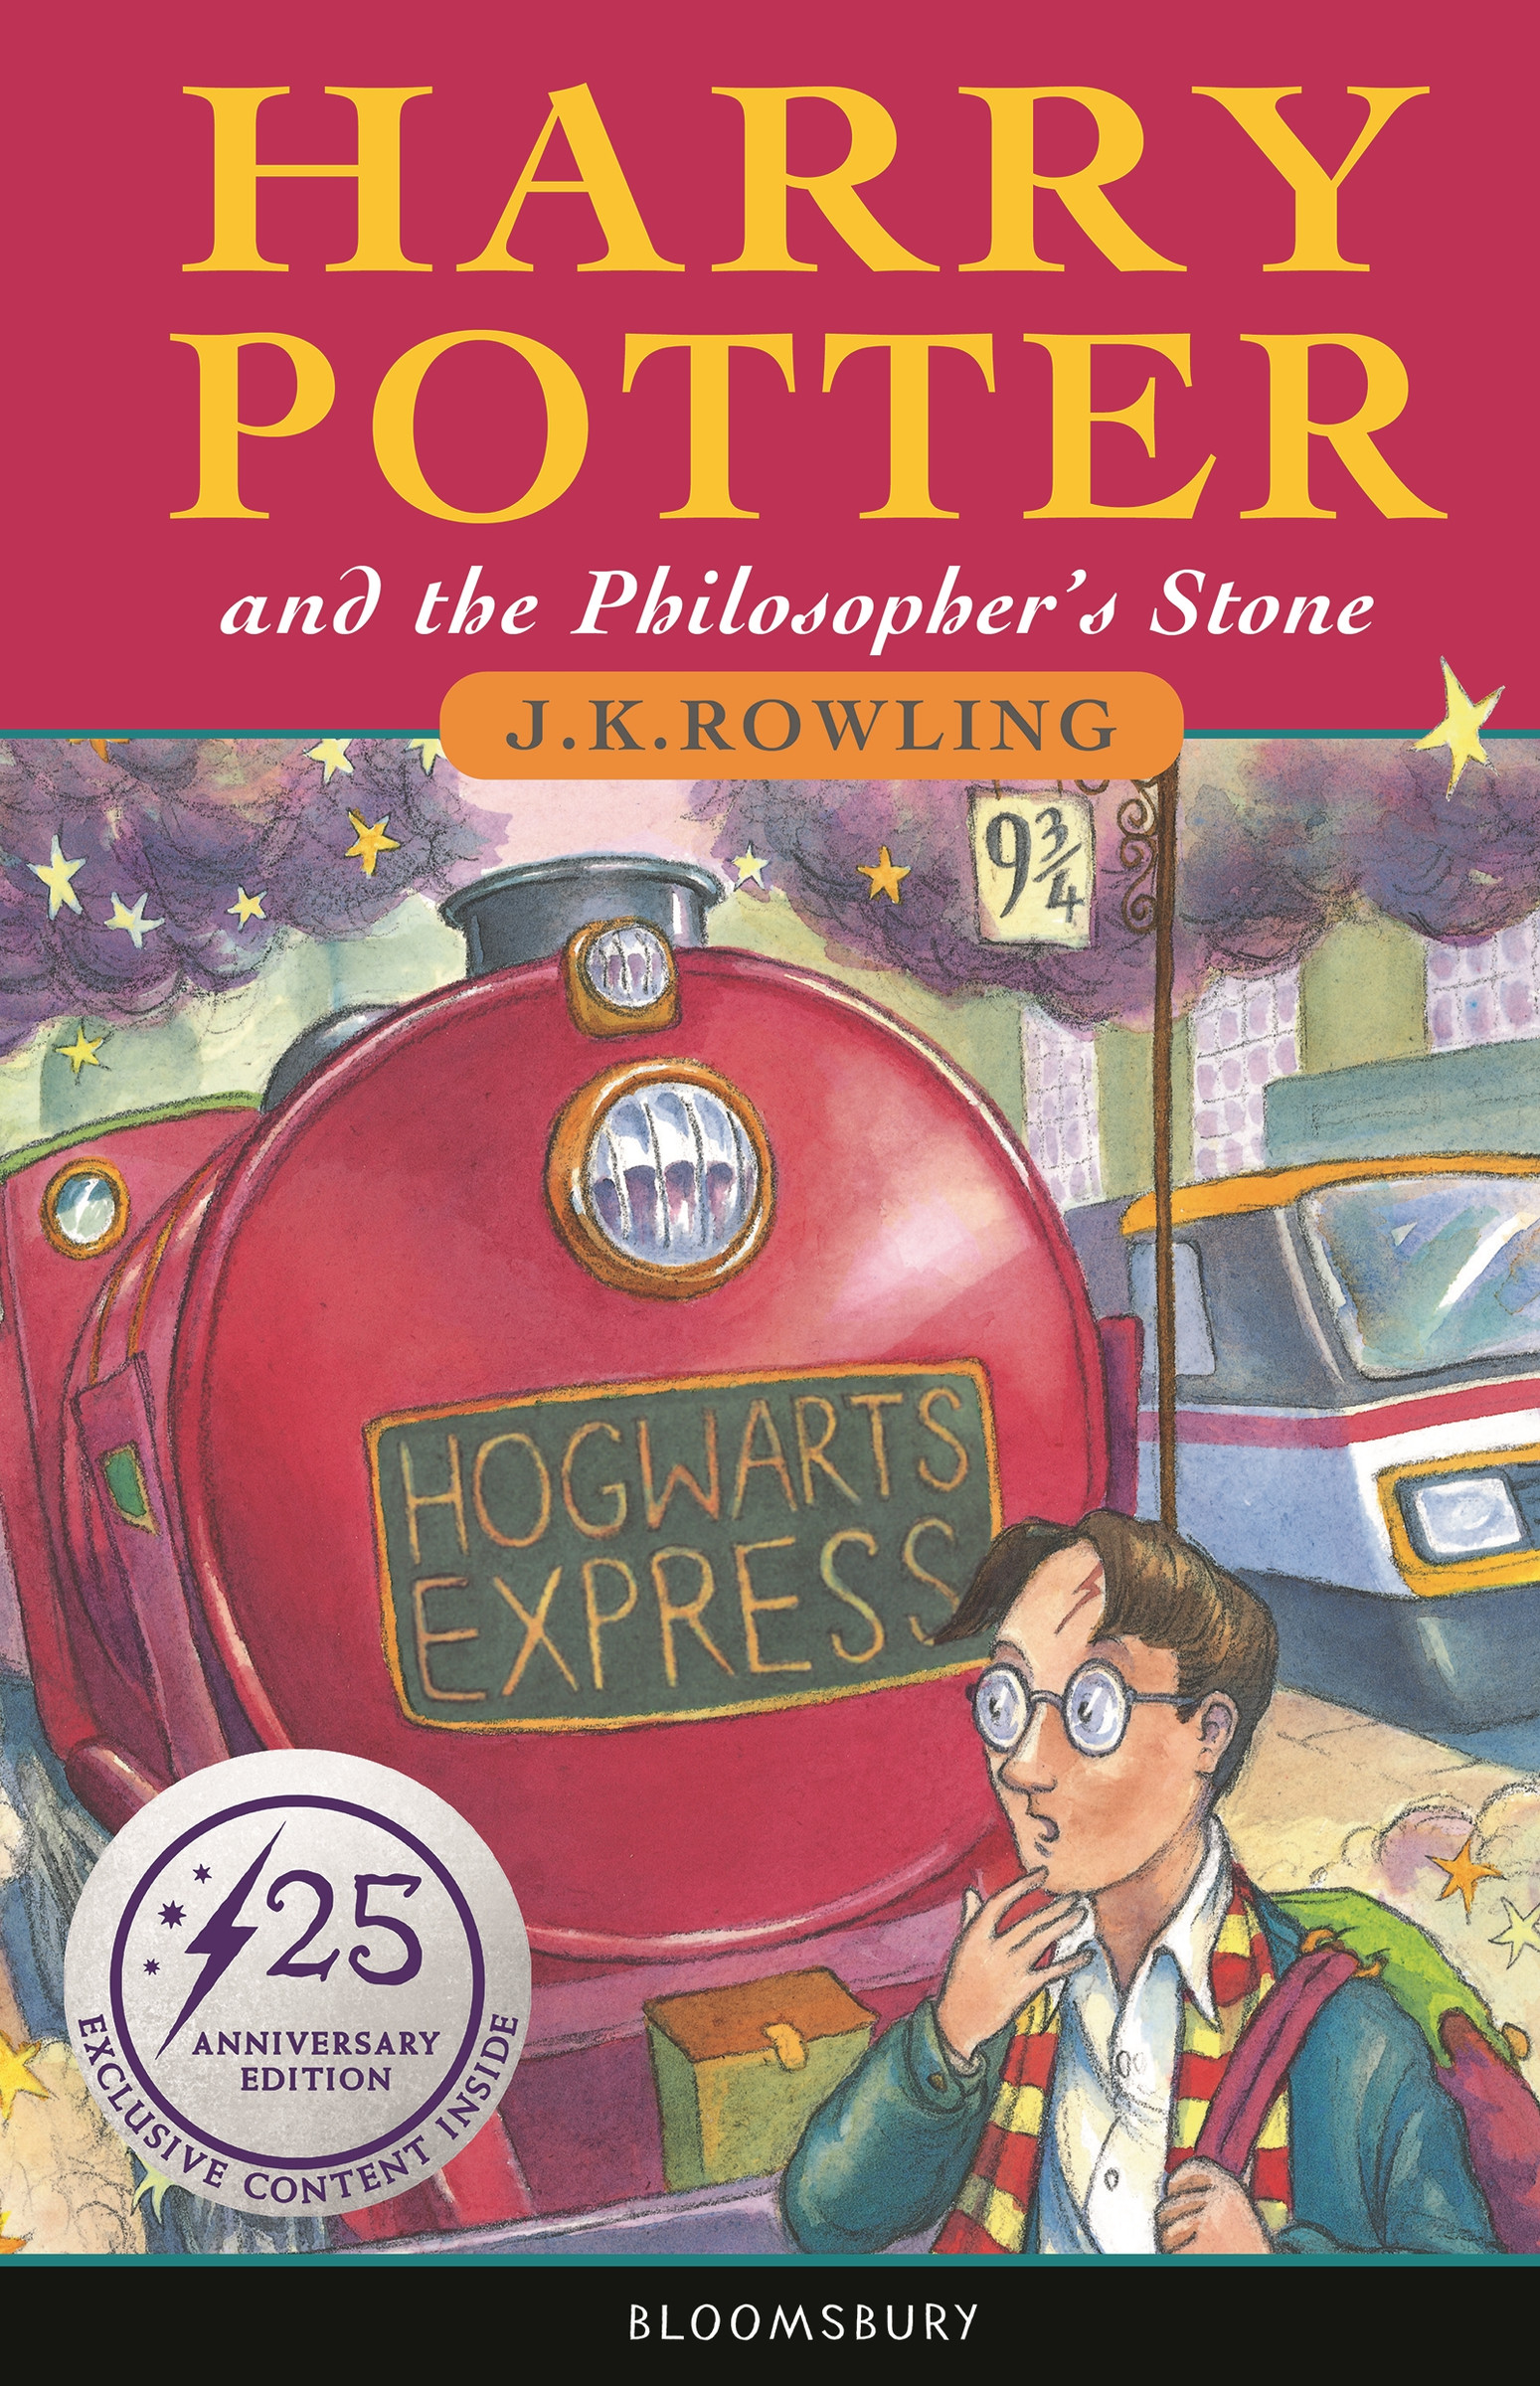 HARRY POTTER AND THE PHILOSOPHER'S STONE - 25TH ANNIVERSARY EDITION